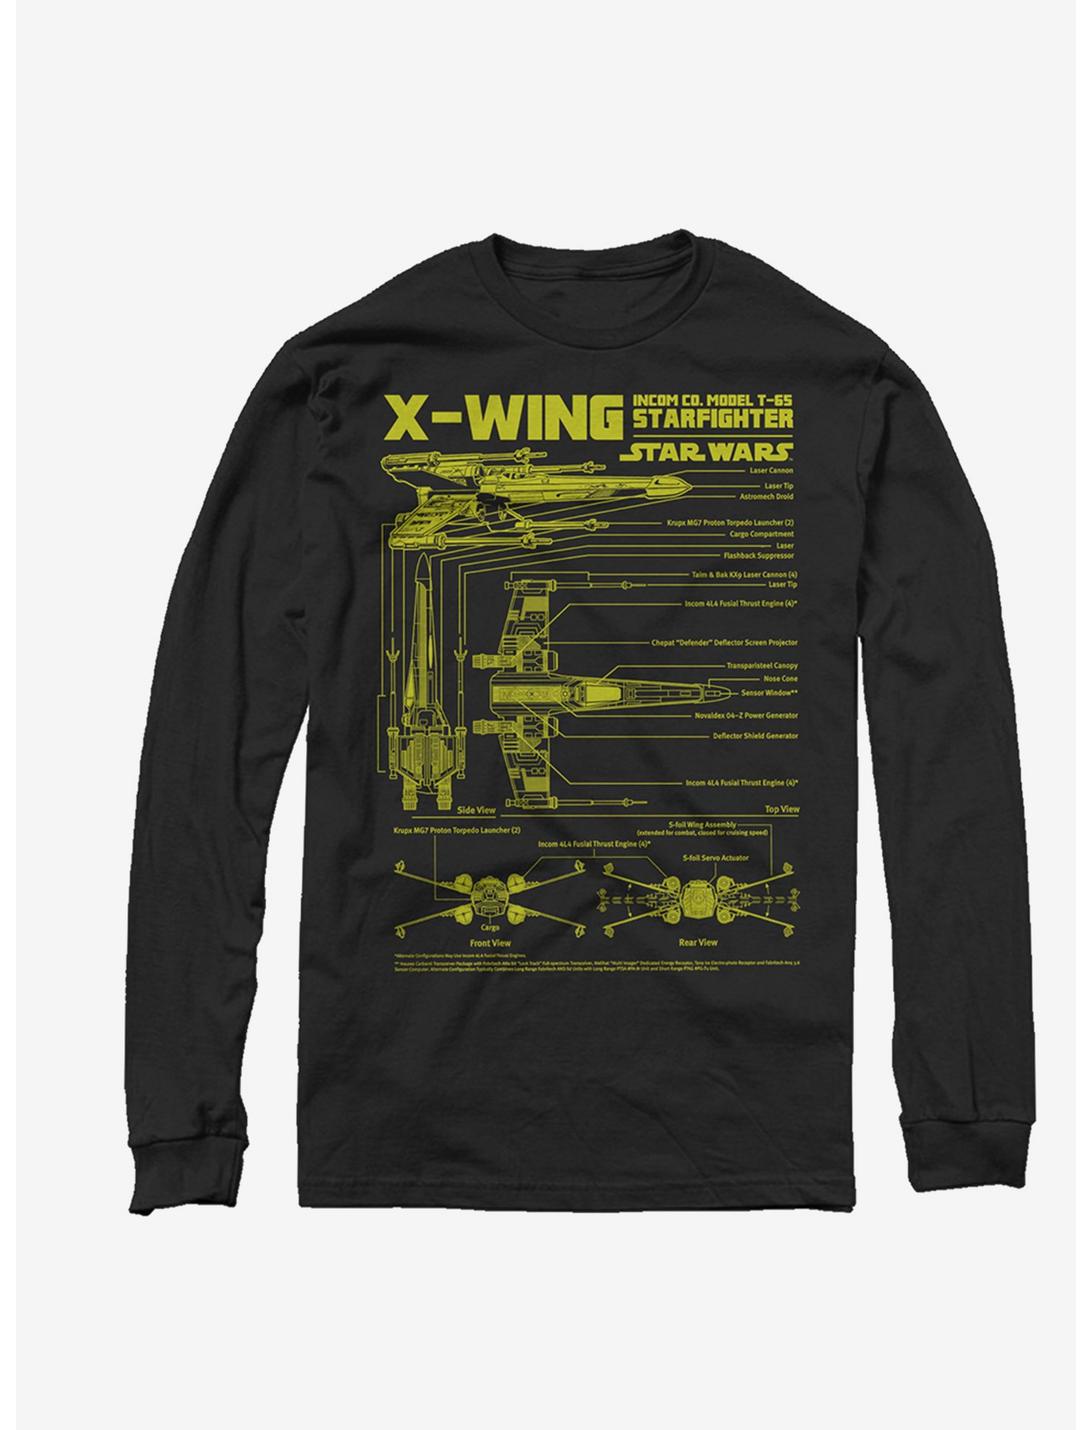 Star Wars X-Wing Schematic Long-Sleeve T-Shirt, BLACK, hi-res